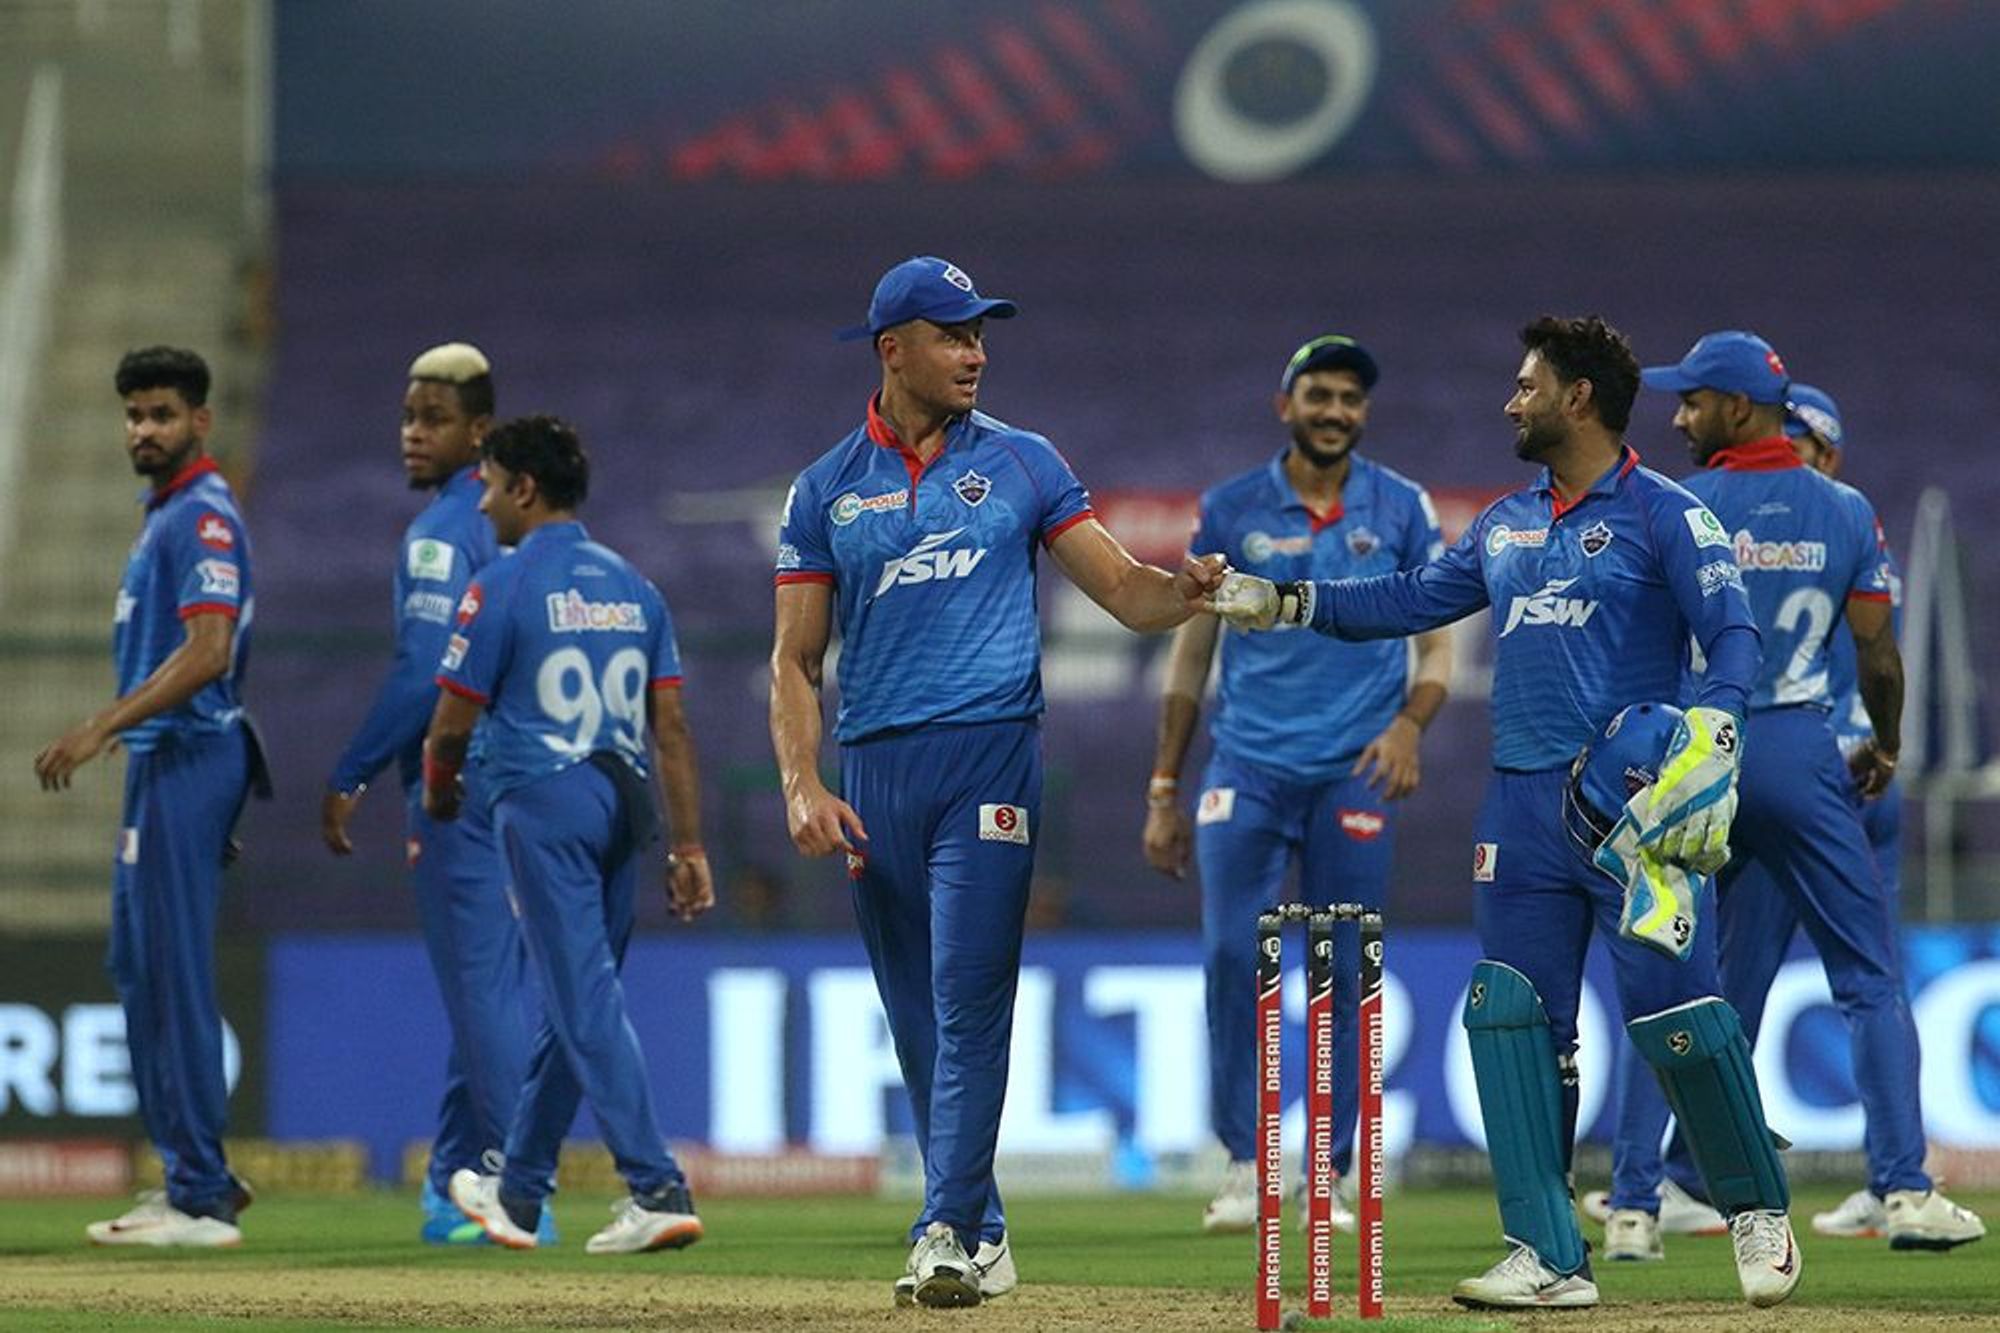 IPL 2020 Review | Delhi Capitals: A rollercoaster campaign that ended as a 'could have been'